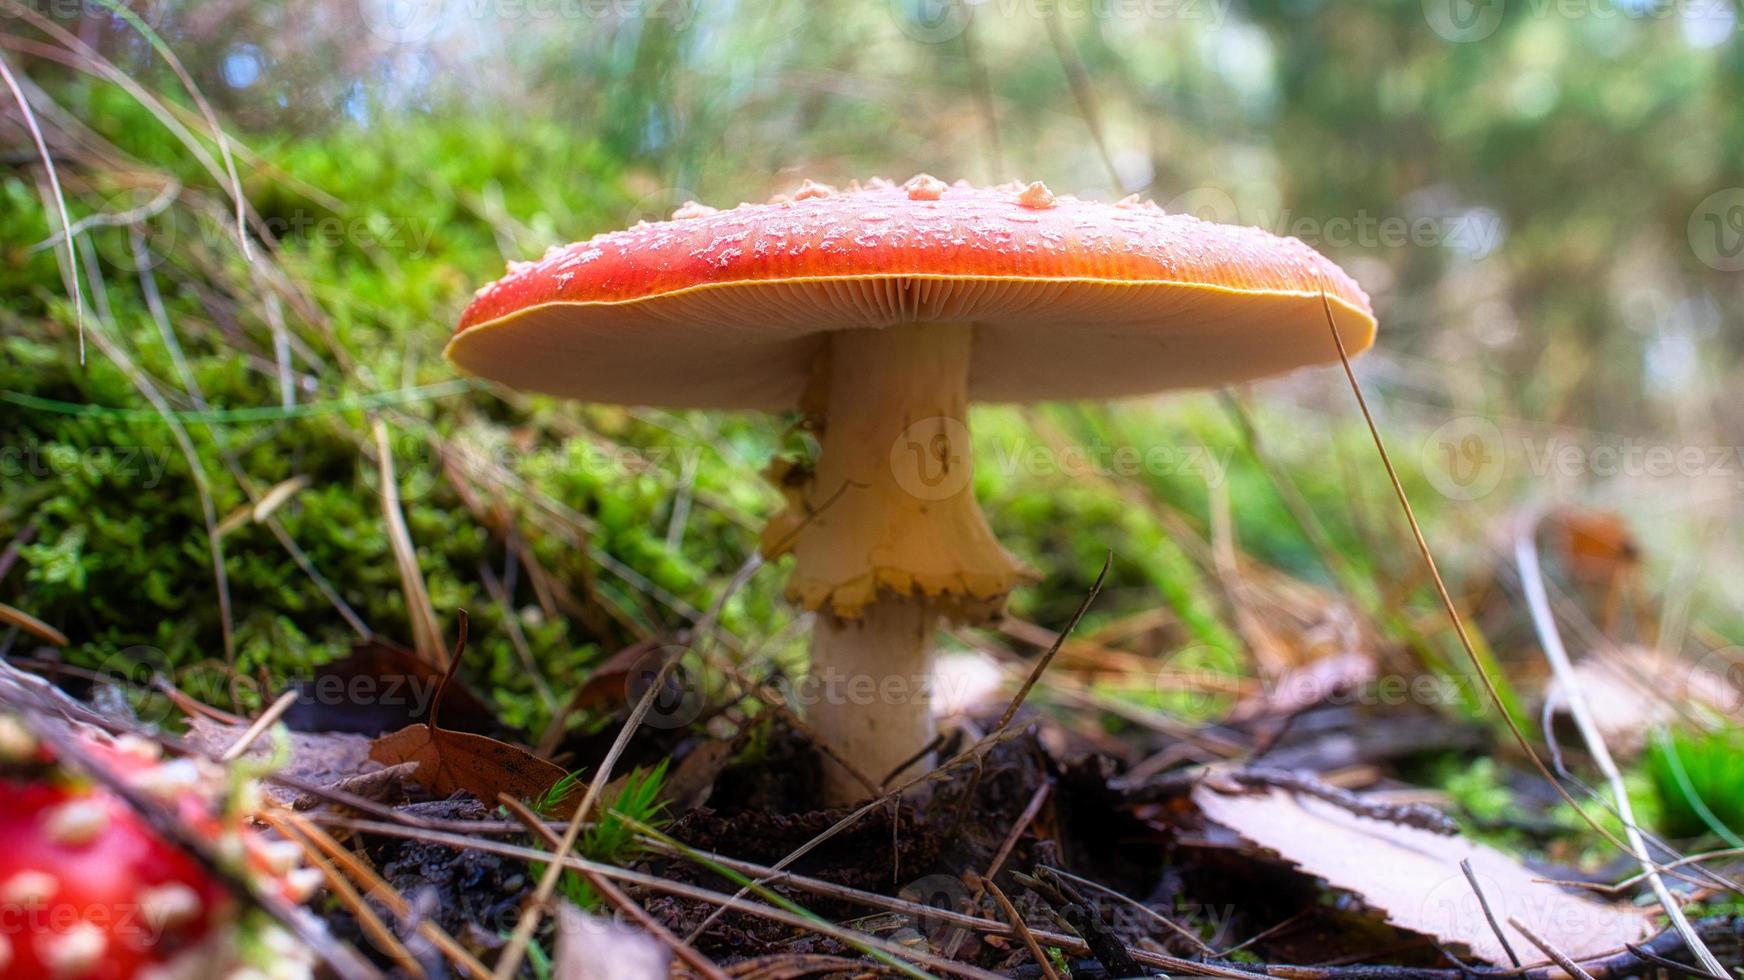 Toadstool, blurry and dreamy, in the grass in the forest. Poisonous mushroom. photo